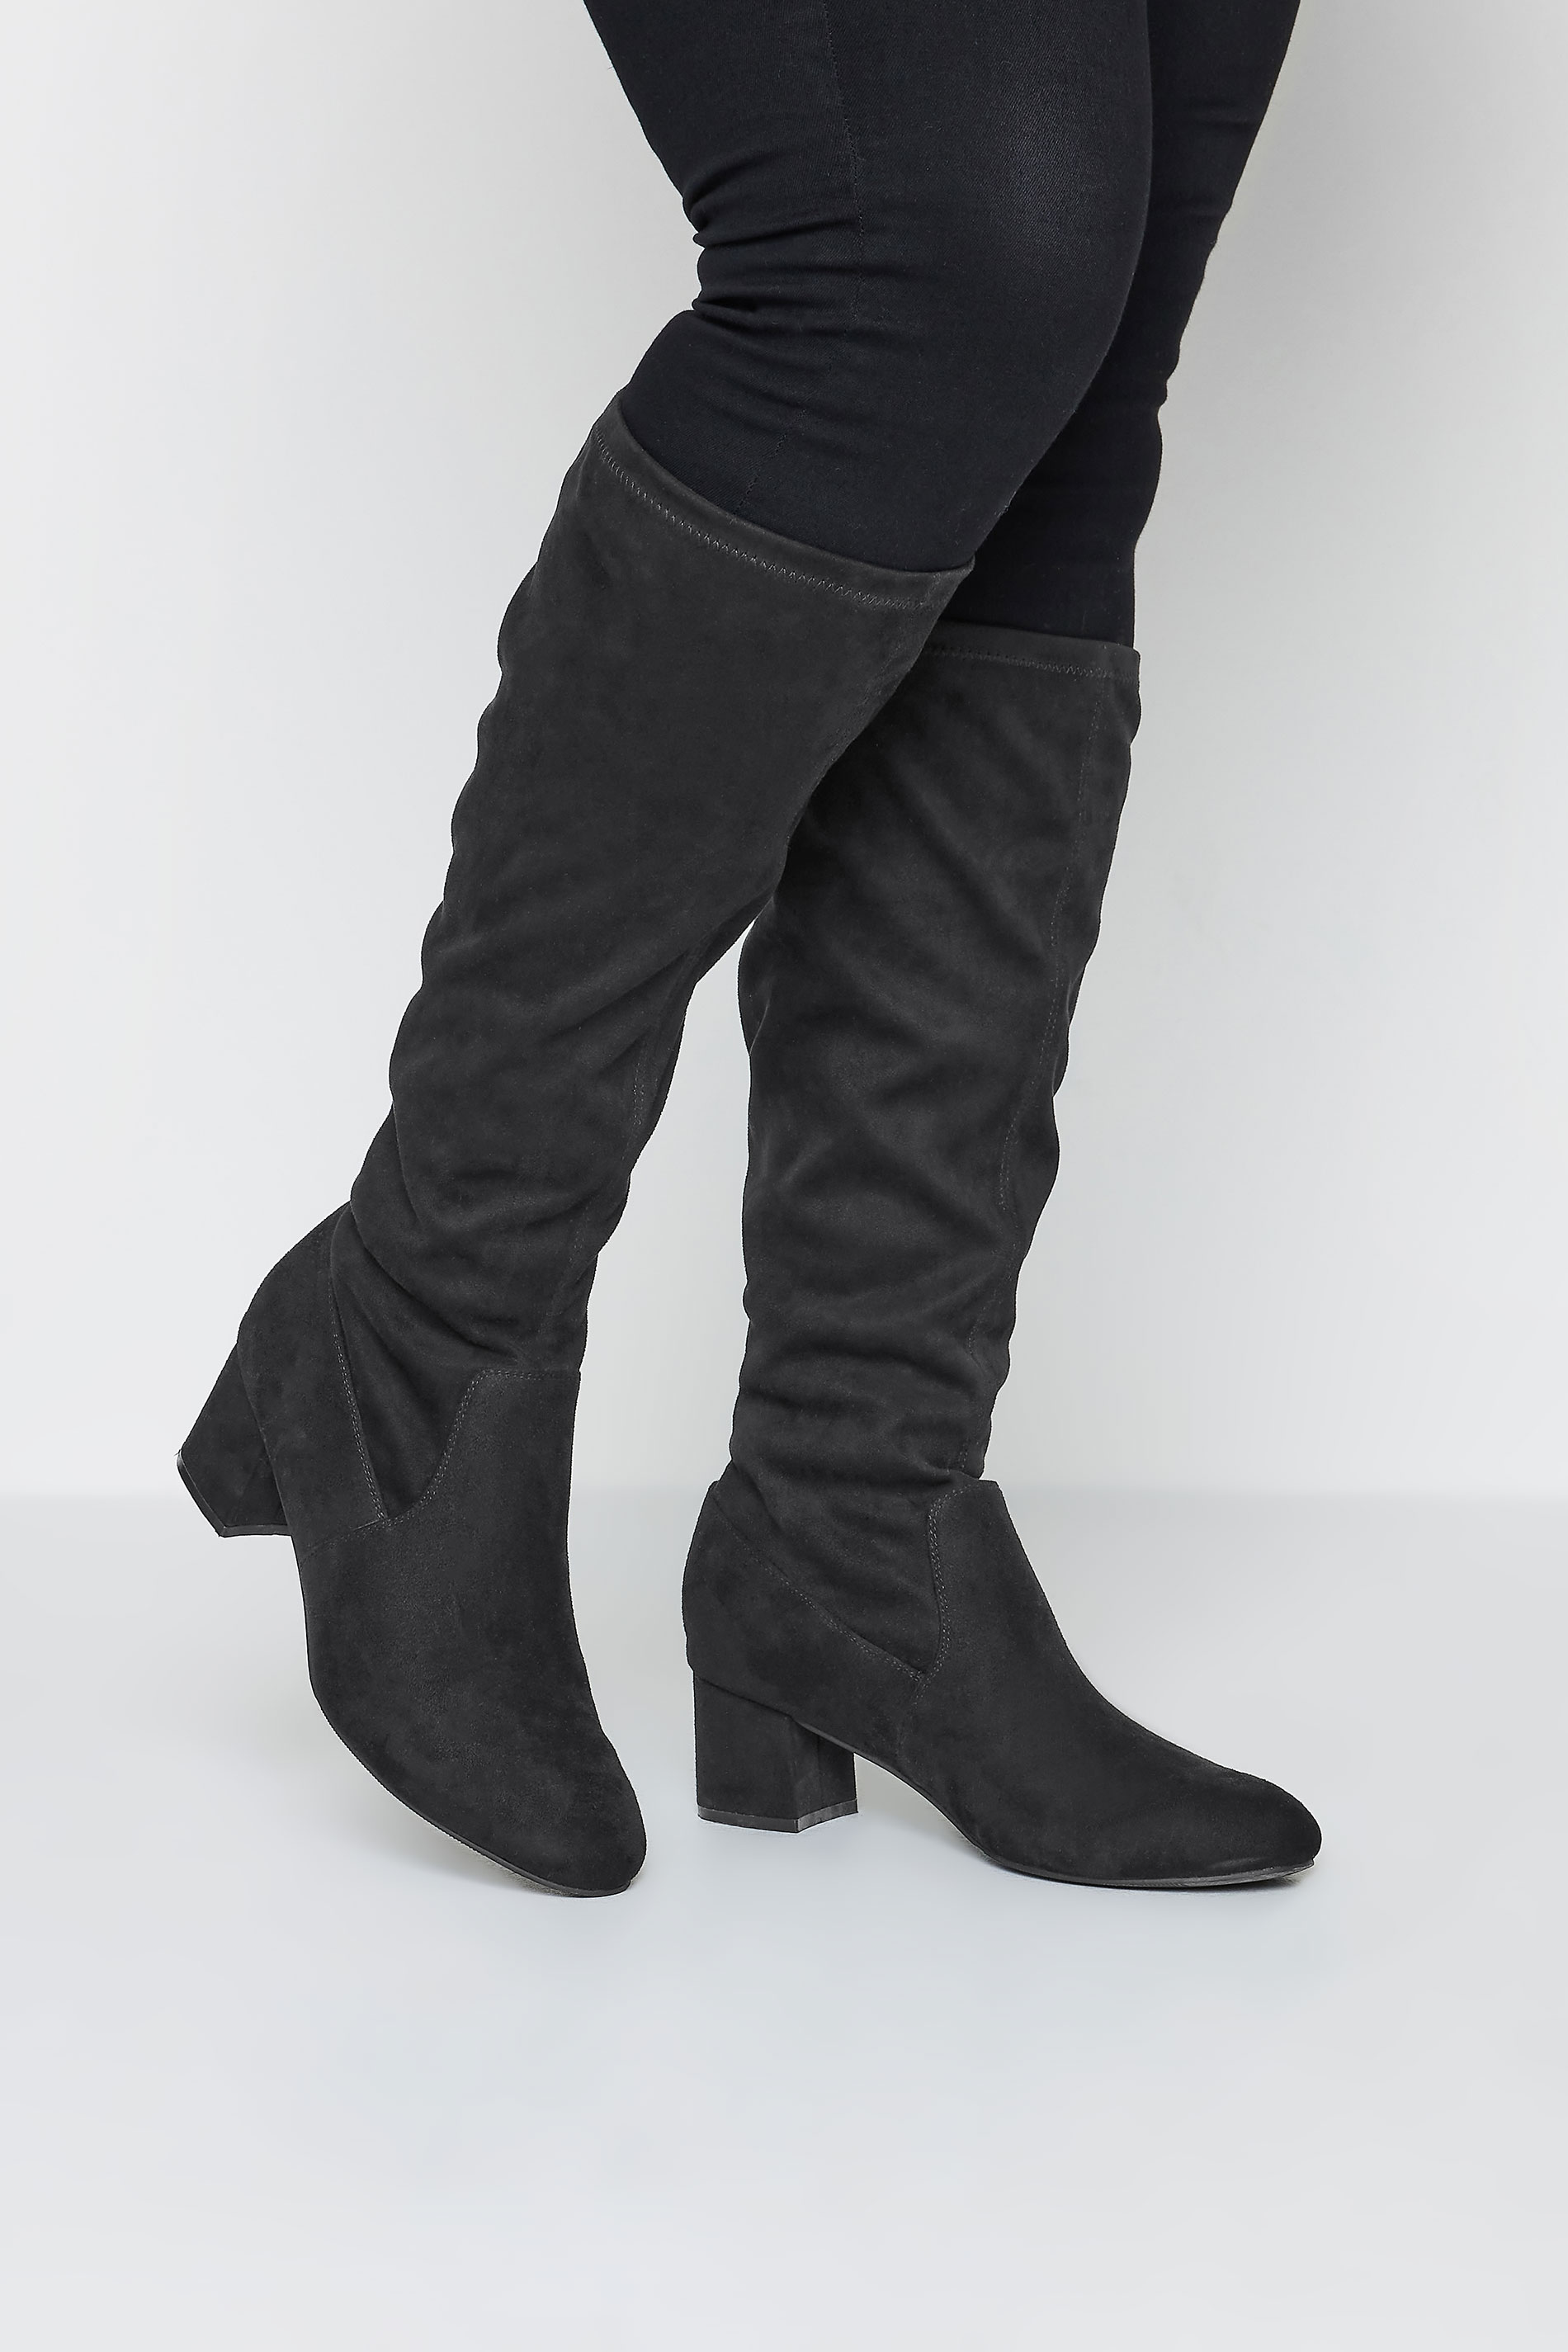 Black Faux Suede Stretch Back Knee High Boots In Wide E Fit & Extra Wide EEE Fit | Yours Clothing 1